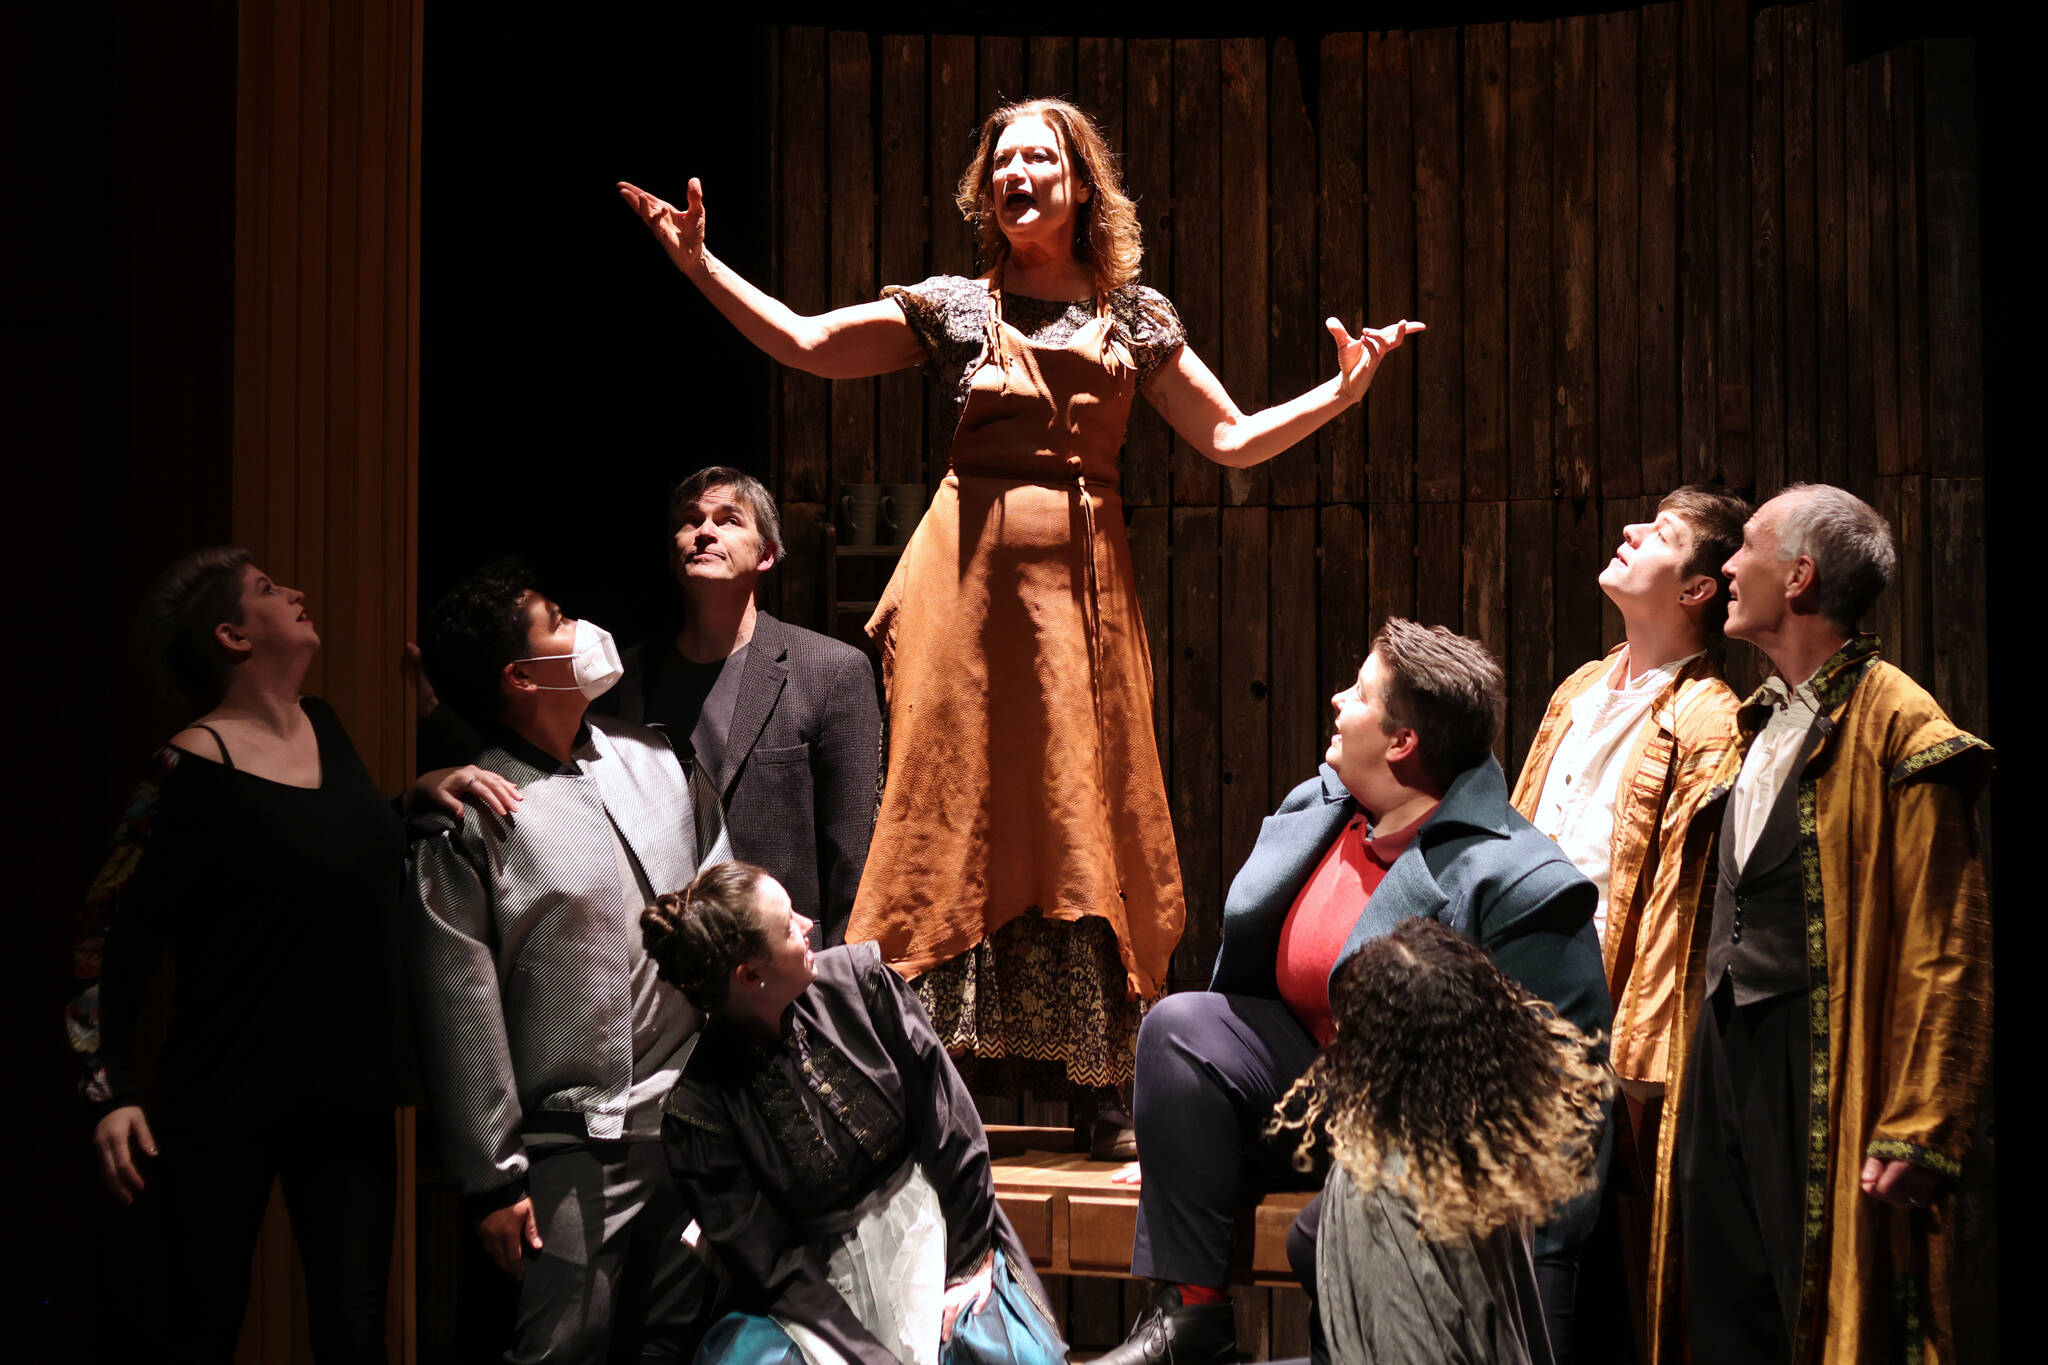 The cast of Theatre in the Rough’s production of “Witch” finishes off an unexpected musical number with flourish. From left to right: Stacy Katasse, Ty Yamoaka, Aaron Elmore, Katie Jensen, Cate Ross, Kelsey Riker, Salissa Thole, Dakota Morgan and Patrick Minik. The local company’s production of the play includes a few musical moments unique to the Juneau effort. (Ben Hohenstatt / Juneau Empire)